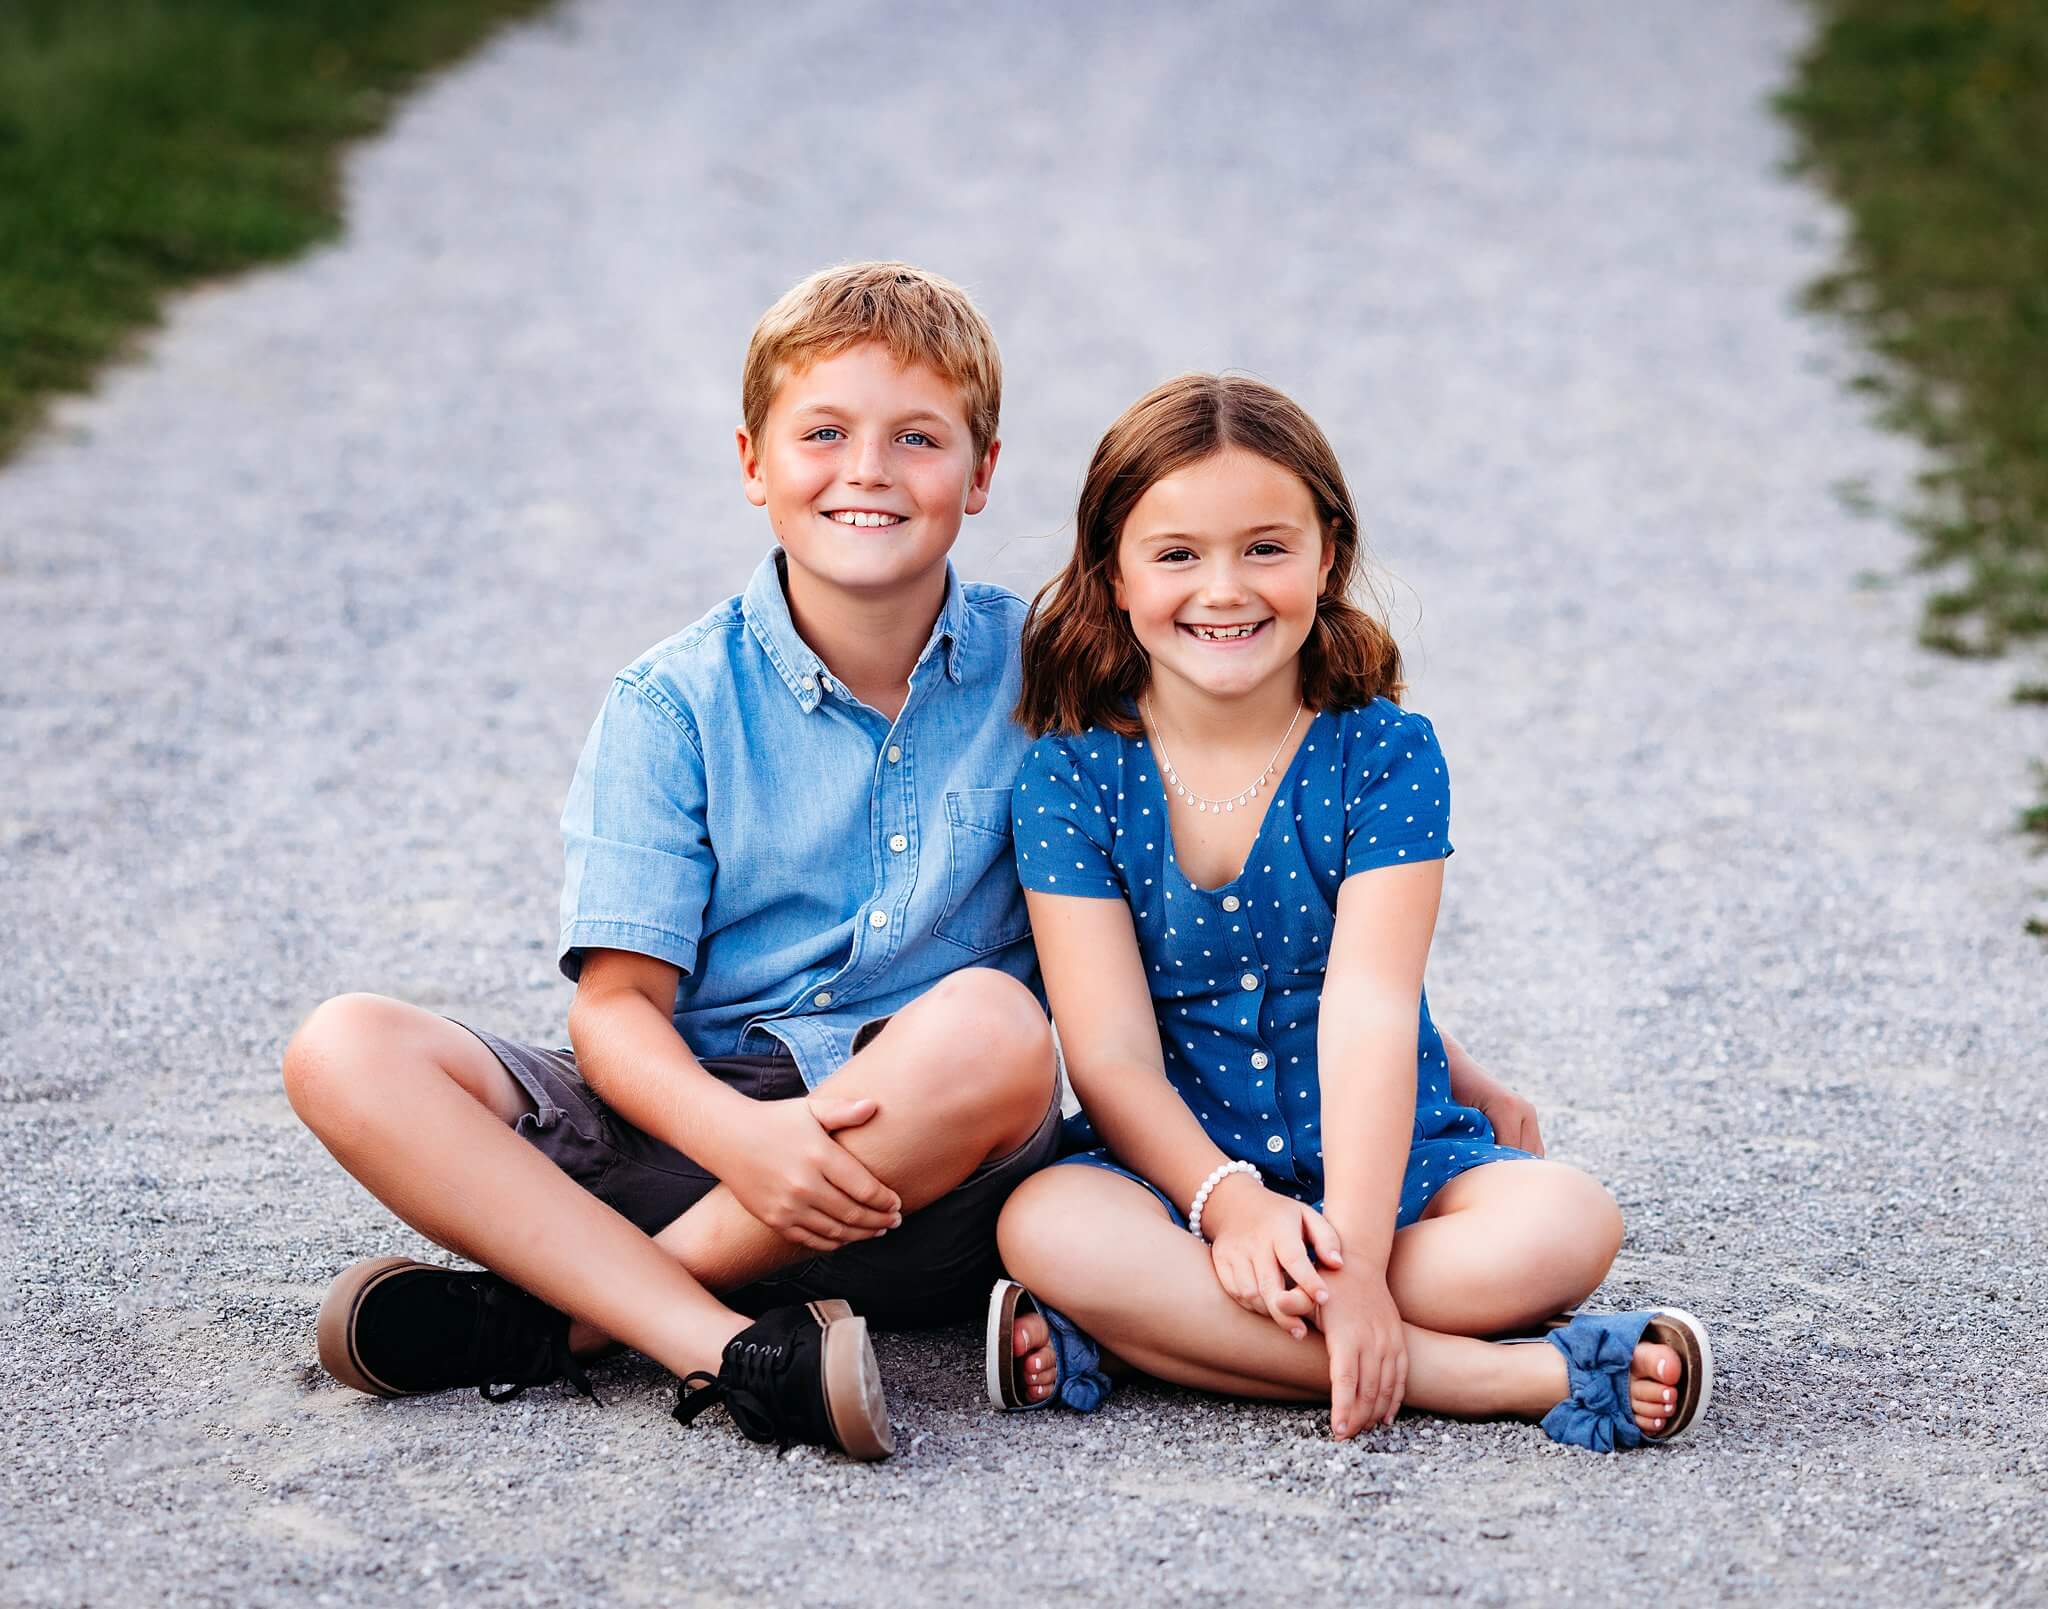 Brother and sister sitting on a pathway smiling at the camera